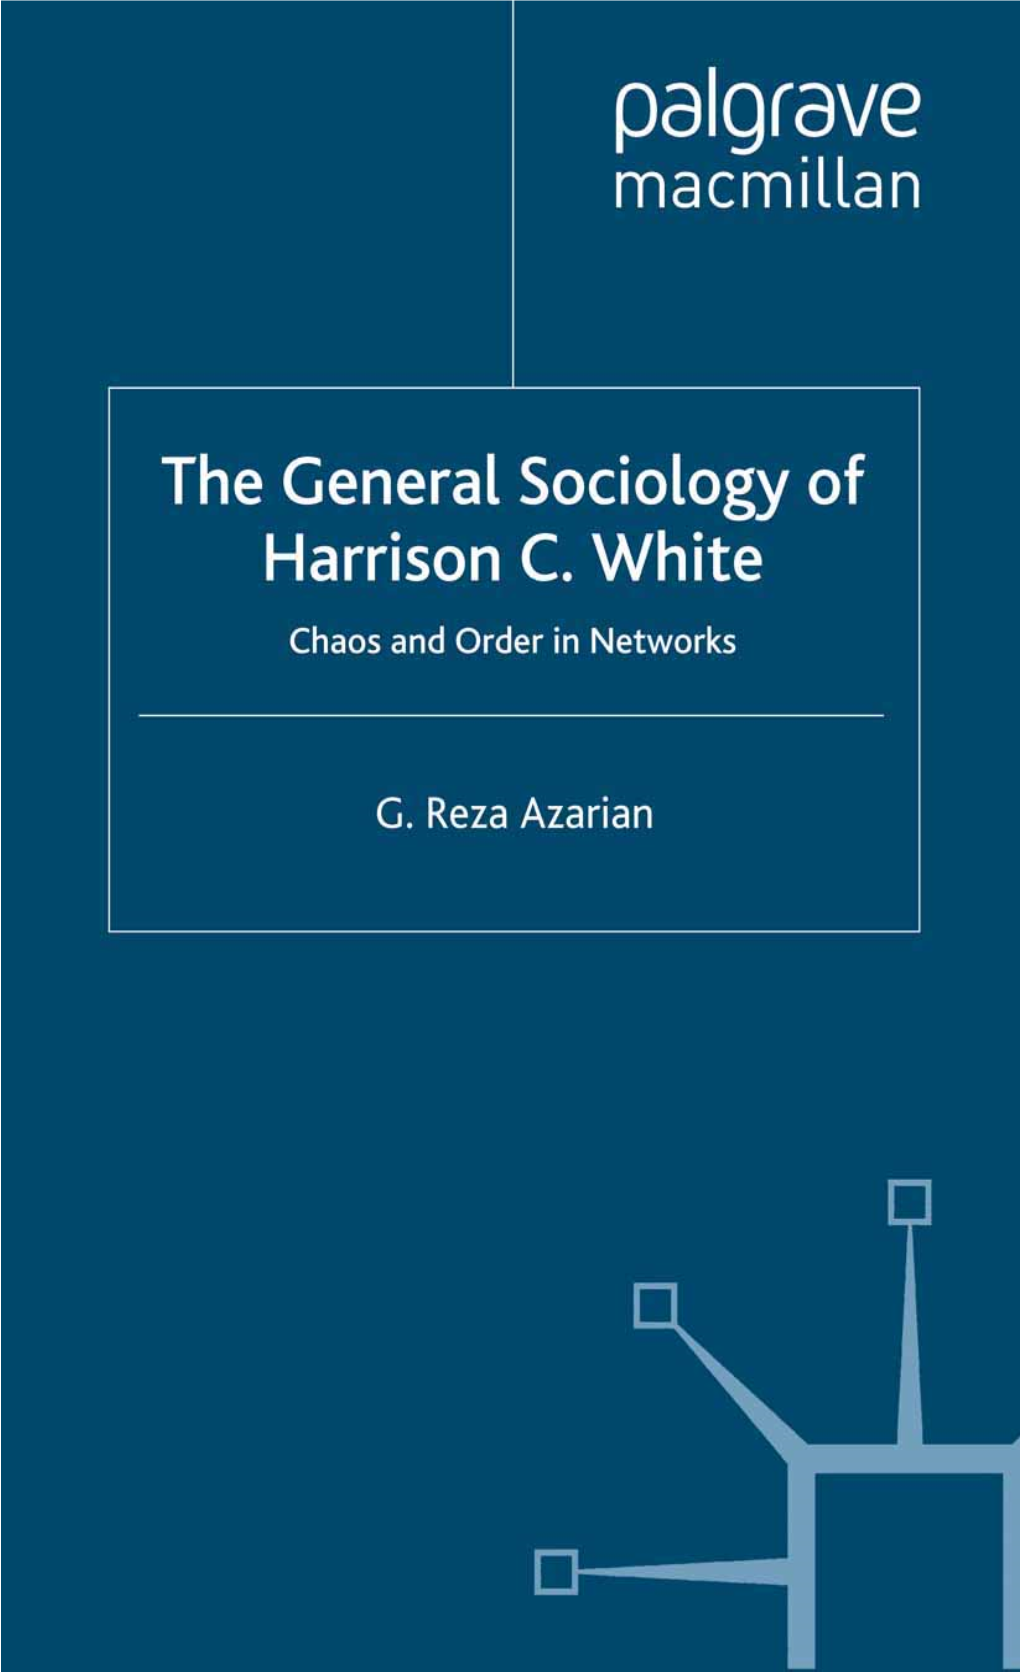 The General Sociology of Harrison C. White